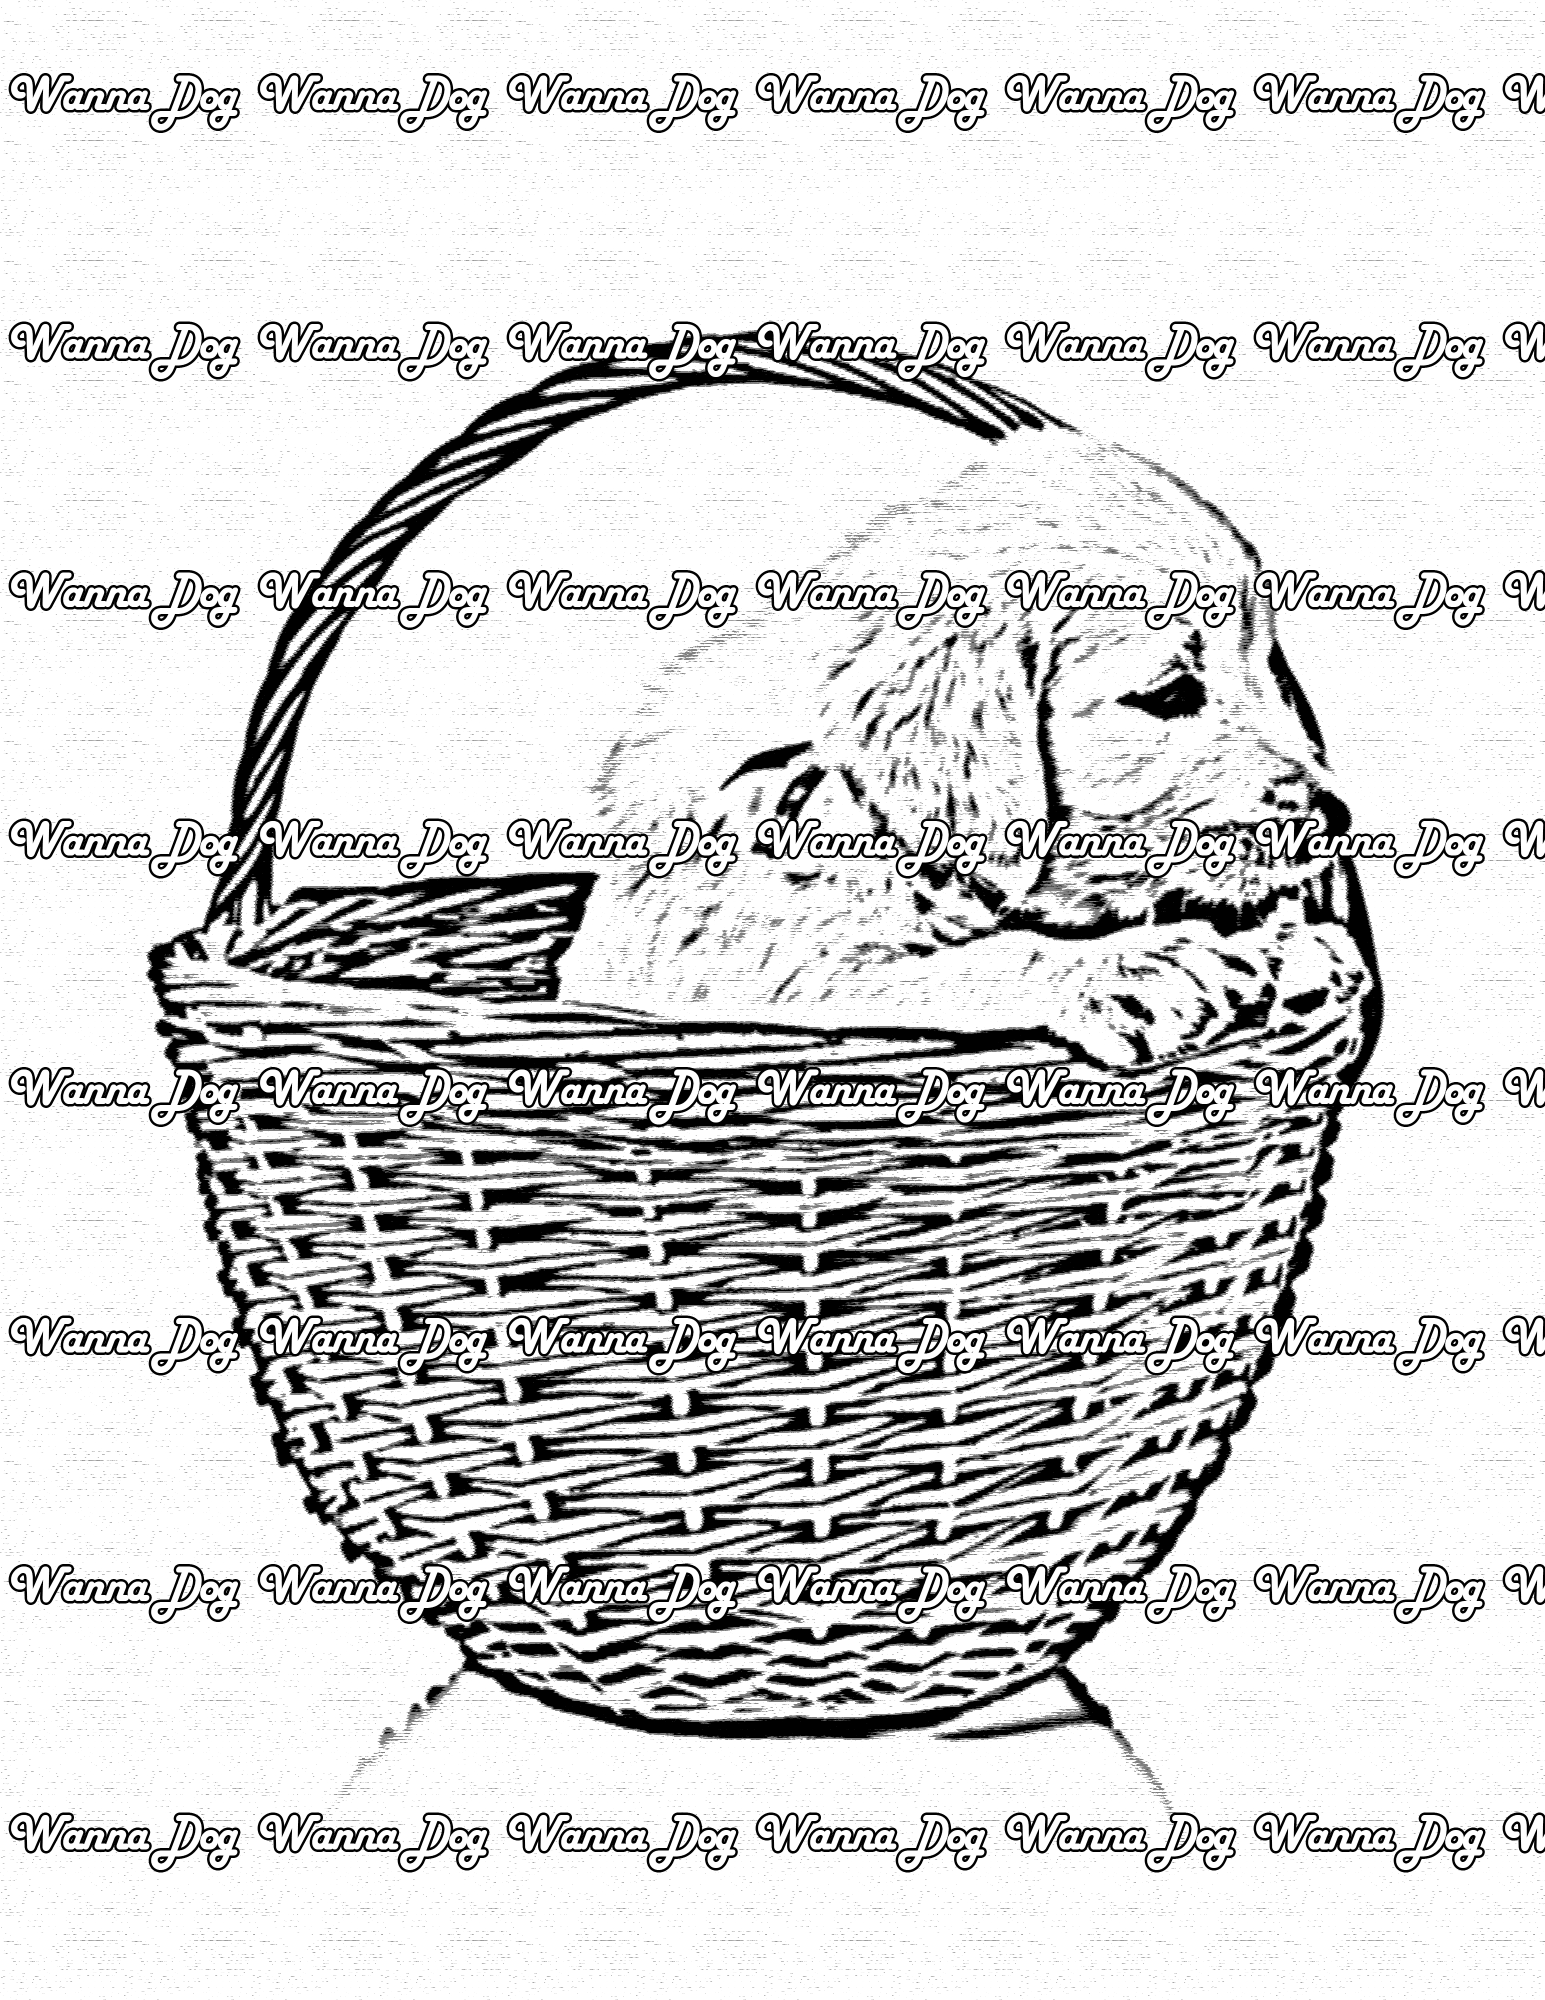 Golden Retriever Puppy Coloring Page of a Golden Retriever Puppy in a basket